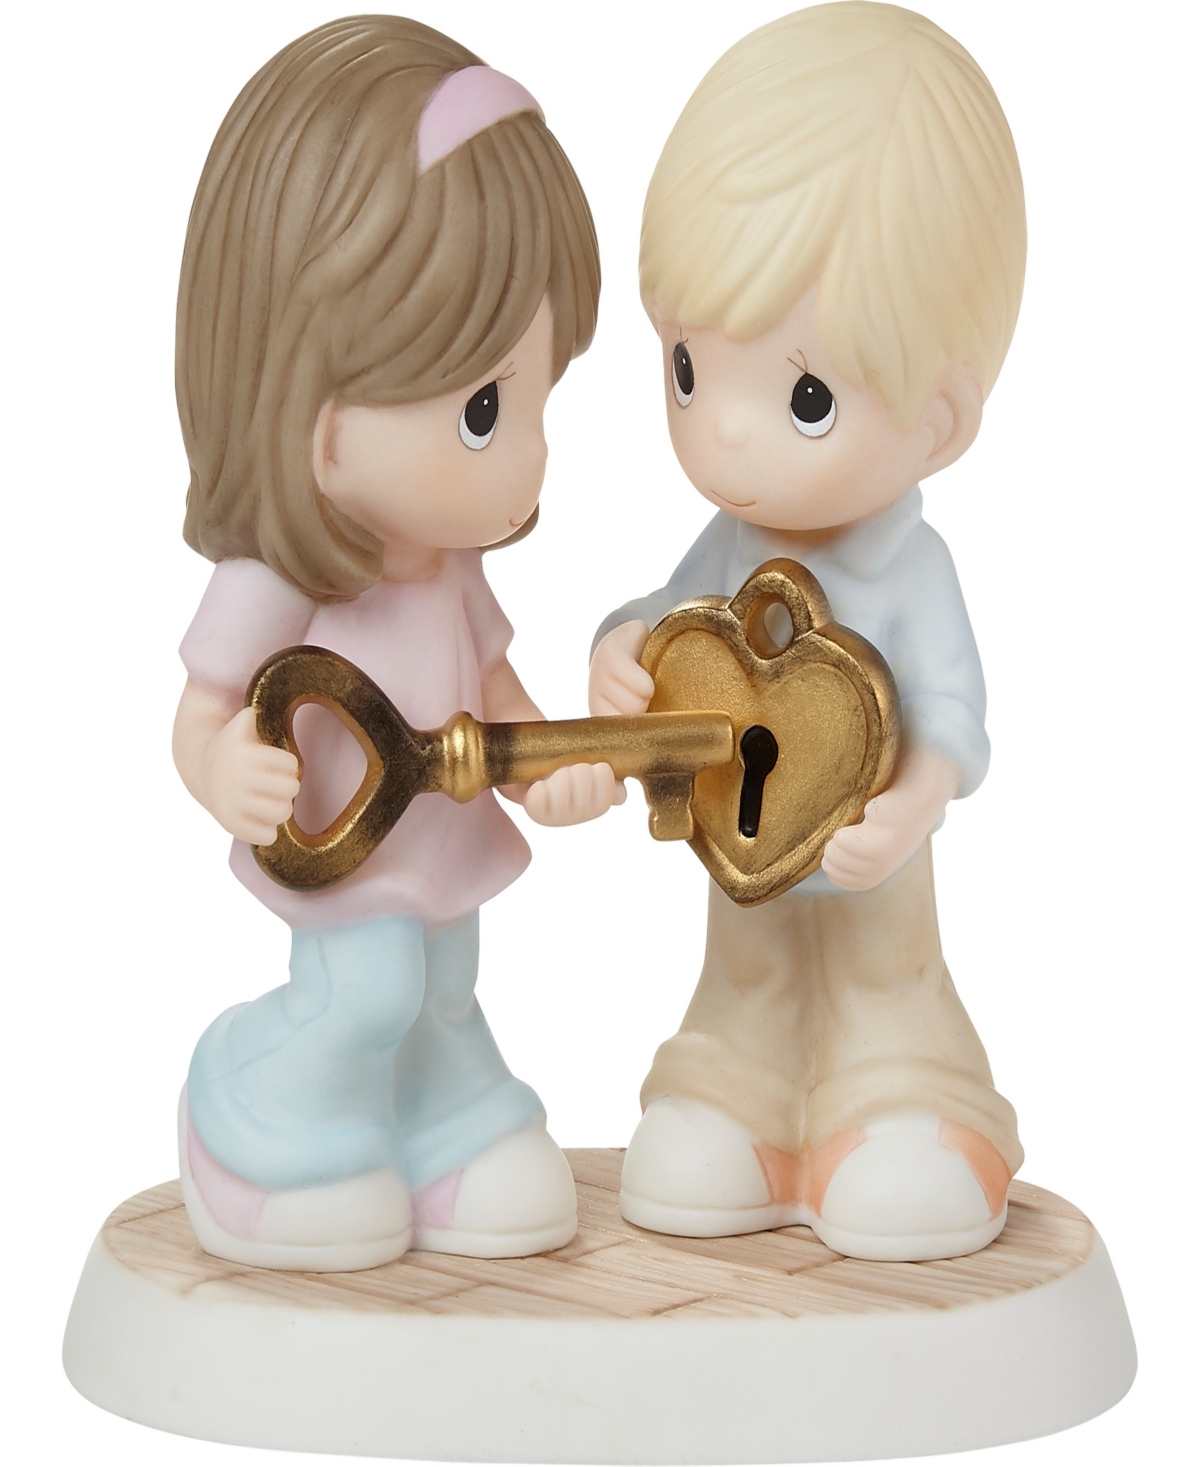 Precious Moments 222003 You Have The Key To My Heart Bisque Porcelain Figurine In Multicolored